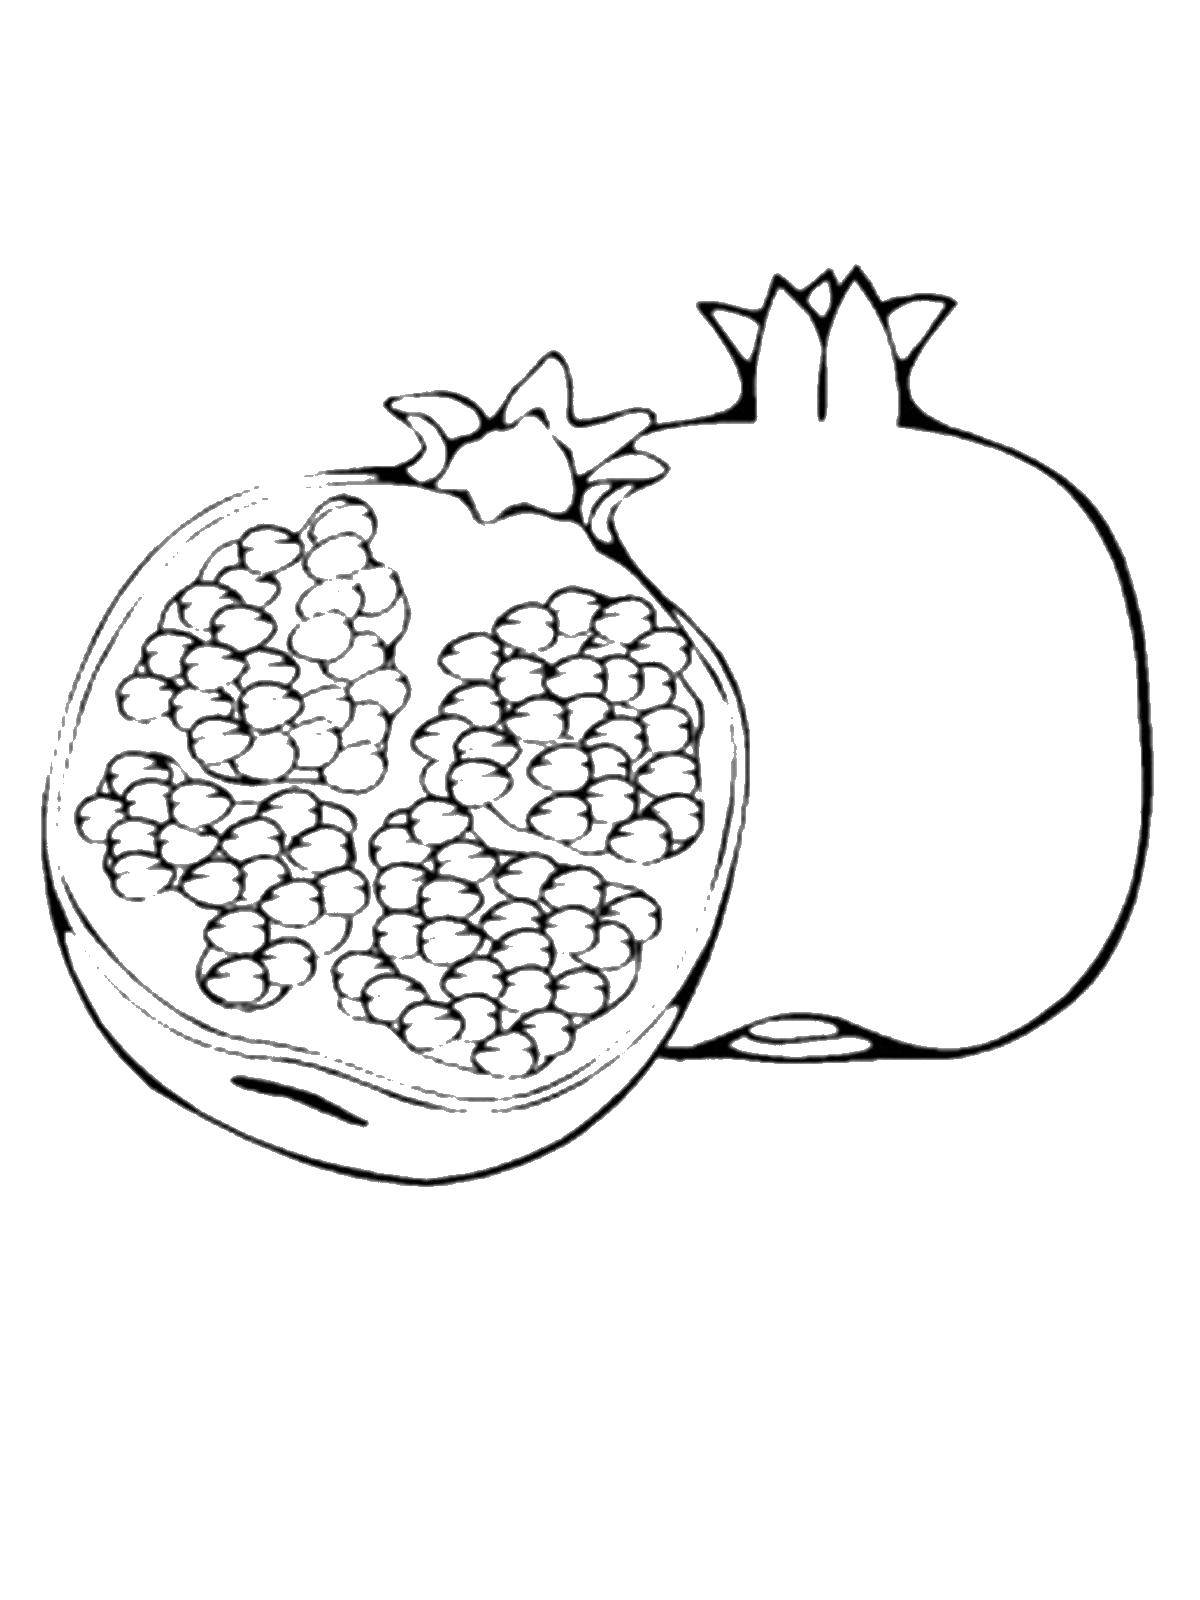 Coloring Garnet ratree. Category fruits. Tags:  fruit, pomegranate.